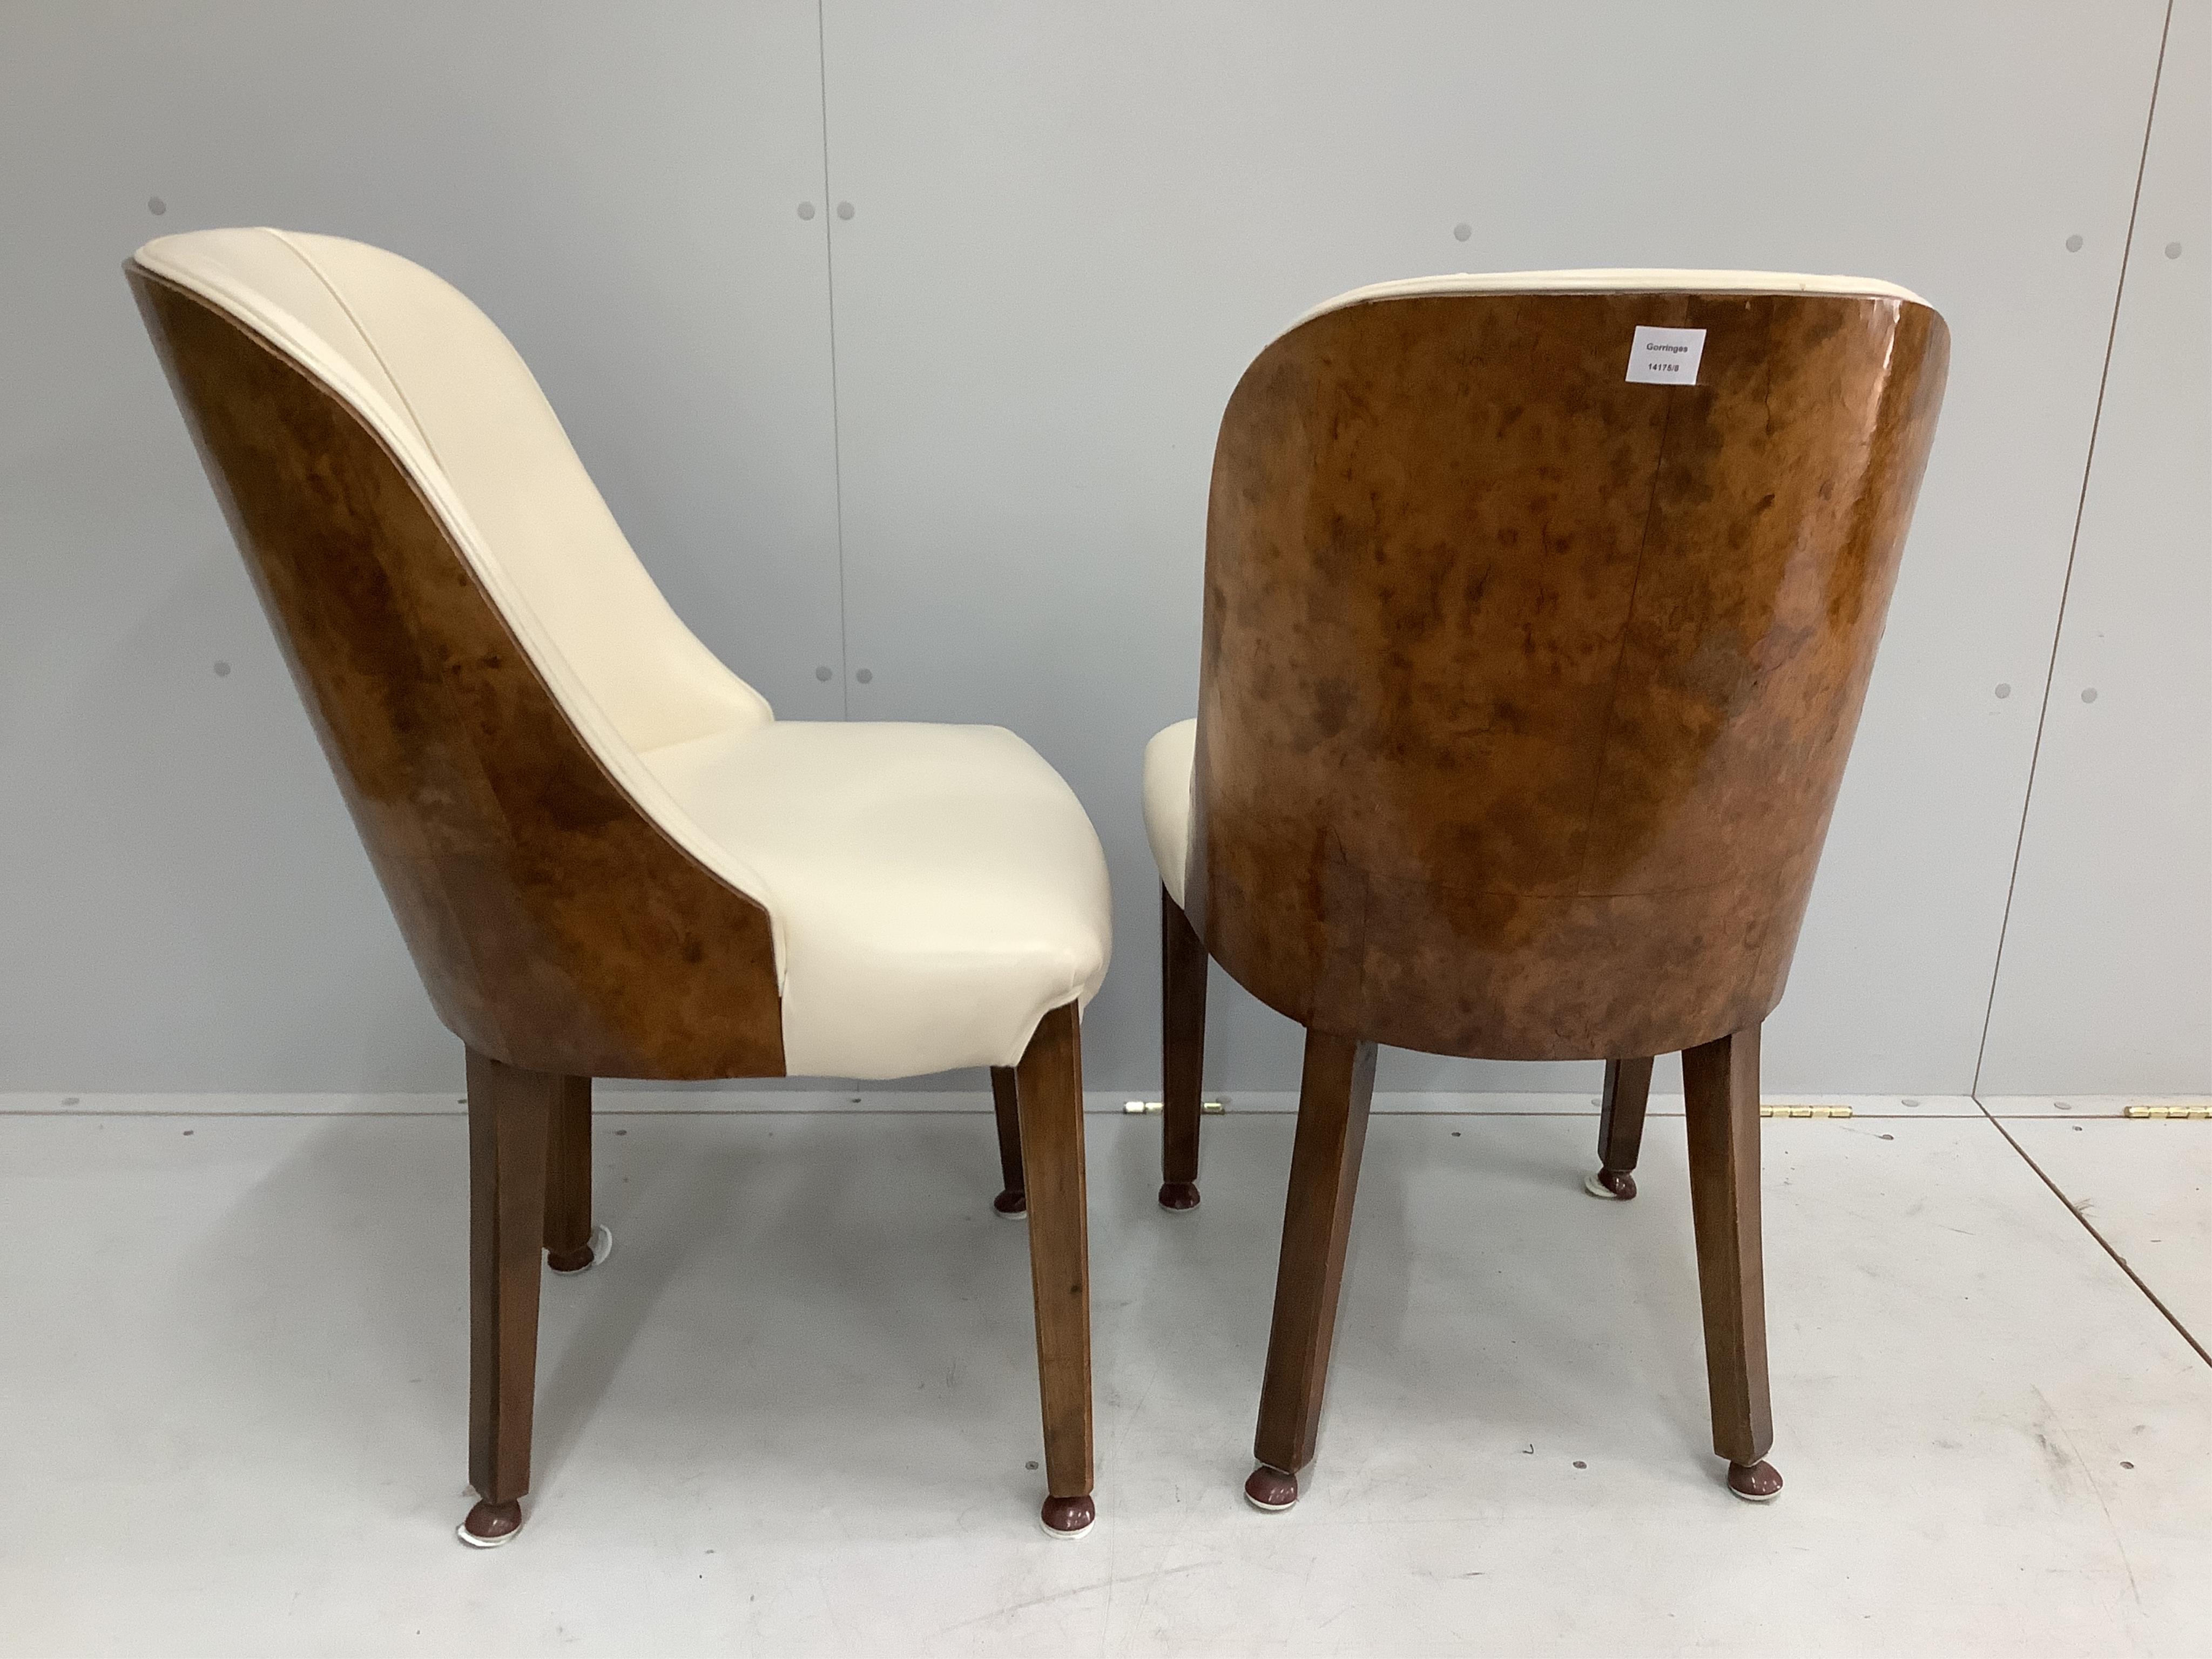 A pair of Art Deco burr walnut and ivory leather chairs